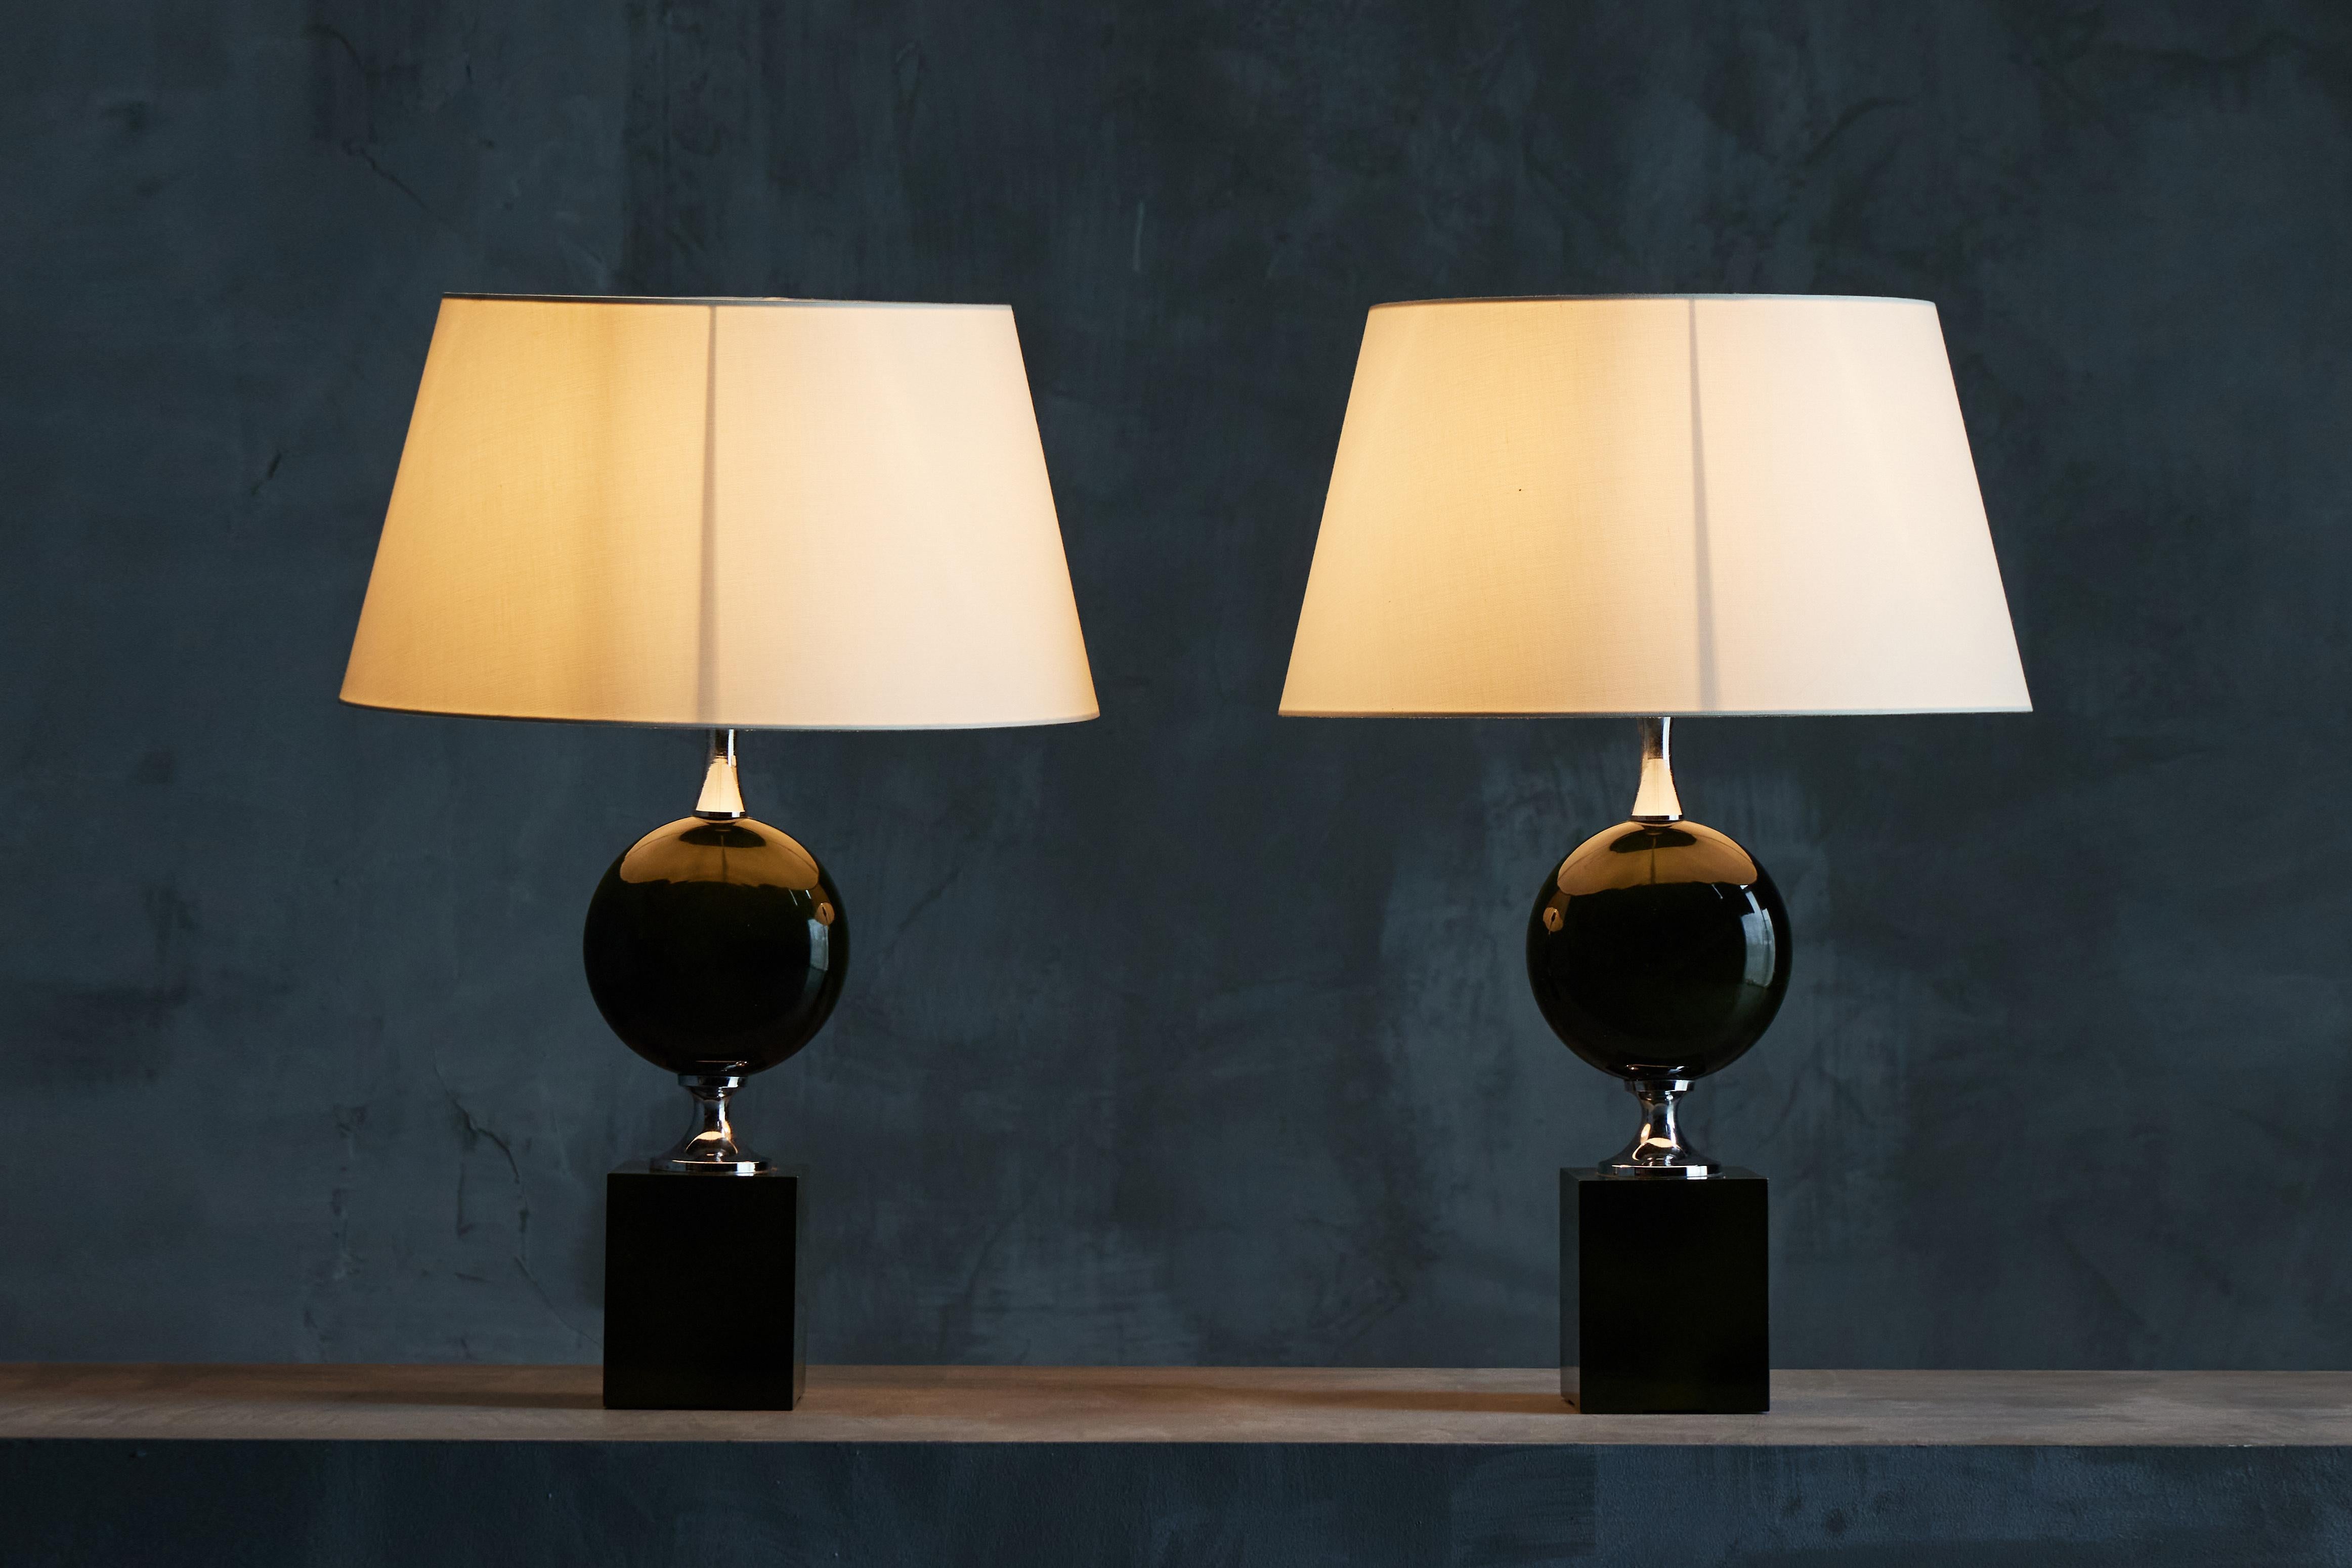 Pair of Philippe Barbier's exquisite table lamps in green lacquer and chrome. Each lamp features a luxurious green lacquered sphere paired with sleek chrome accents. Inspired by neo-classical design elements, this rare Maison Barbier creation